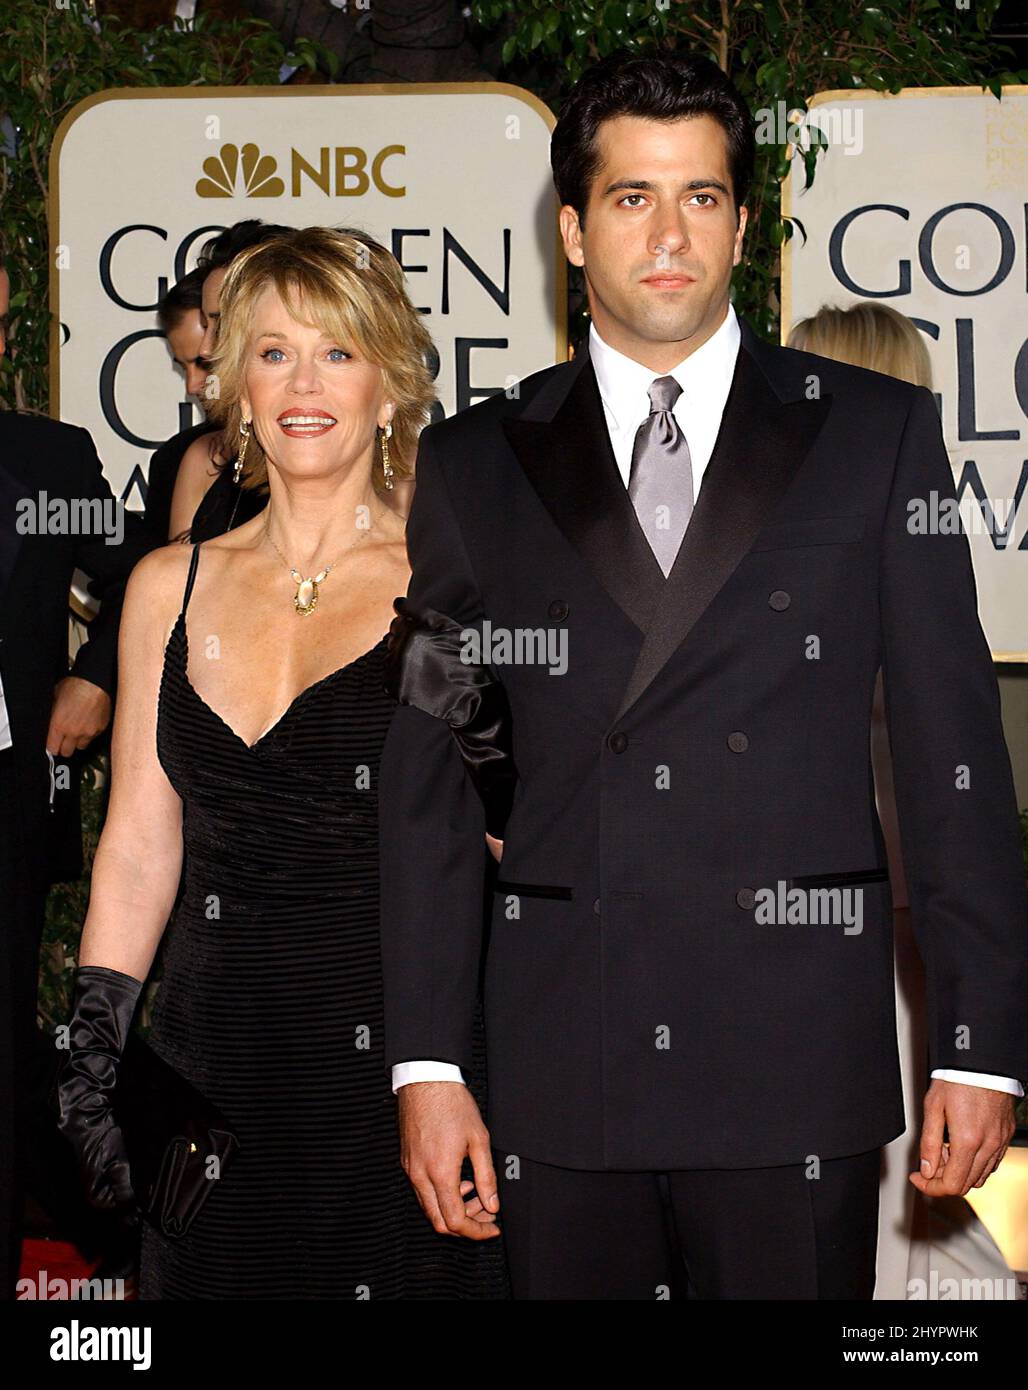 JANE FONDA & SON TROY GARITY ATTEND THE 61st ANNUAL GOLDEN GLOBE AWARDS IN BEVERLY HILLS, CALIFORNIA. PICTURE: UK PRESS Stock Photo